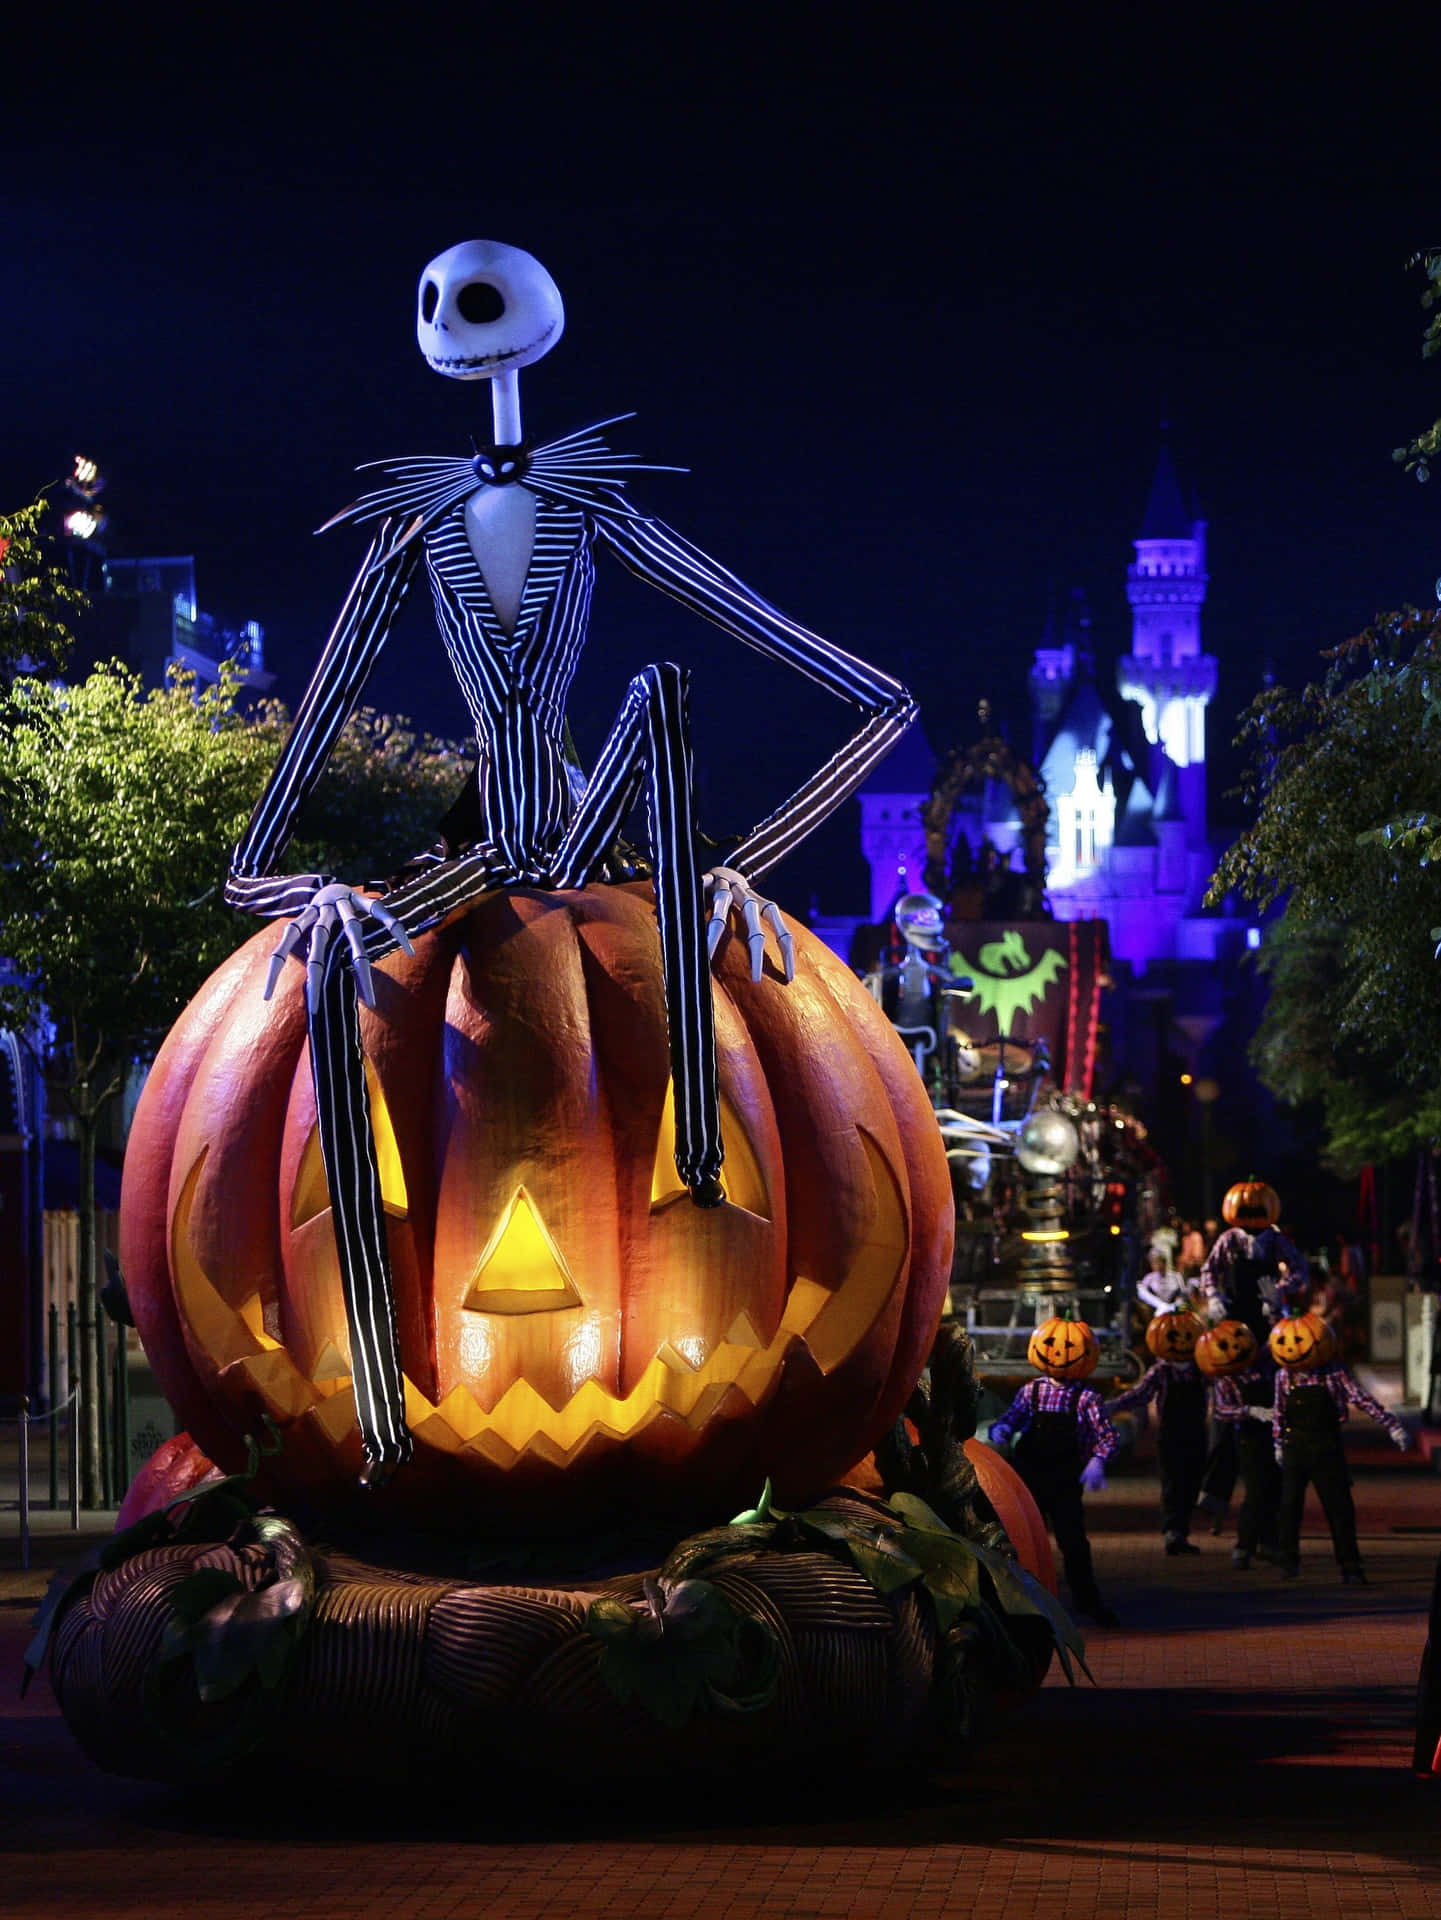 Magical Halloween Night At The Disney Castle